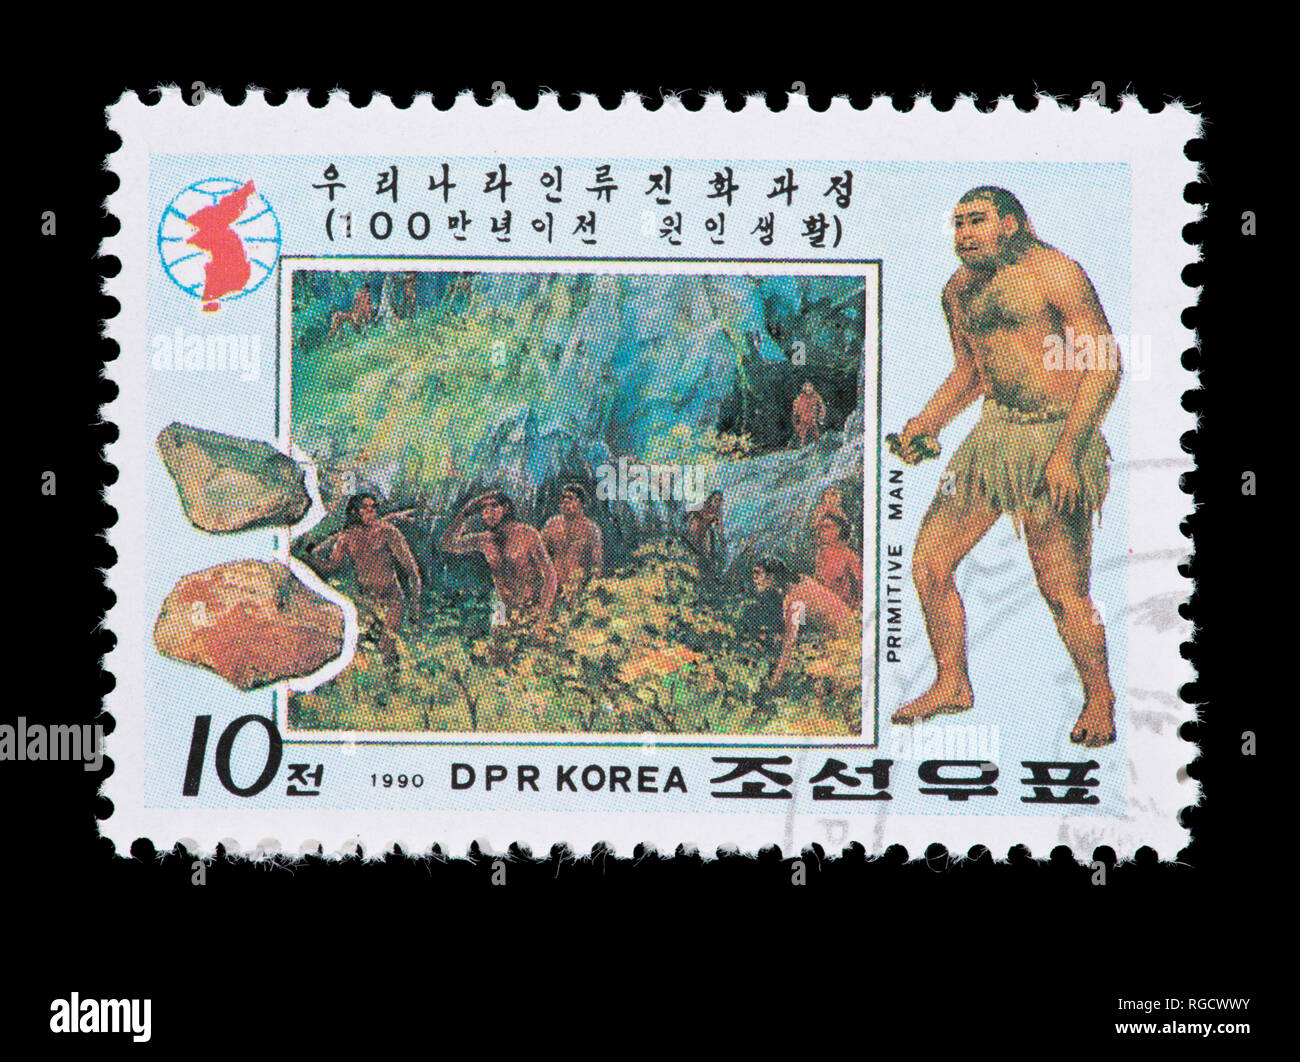 Postage stamp from North Korea depicting  primitive man and stone tools. Stock Photo